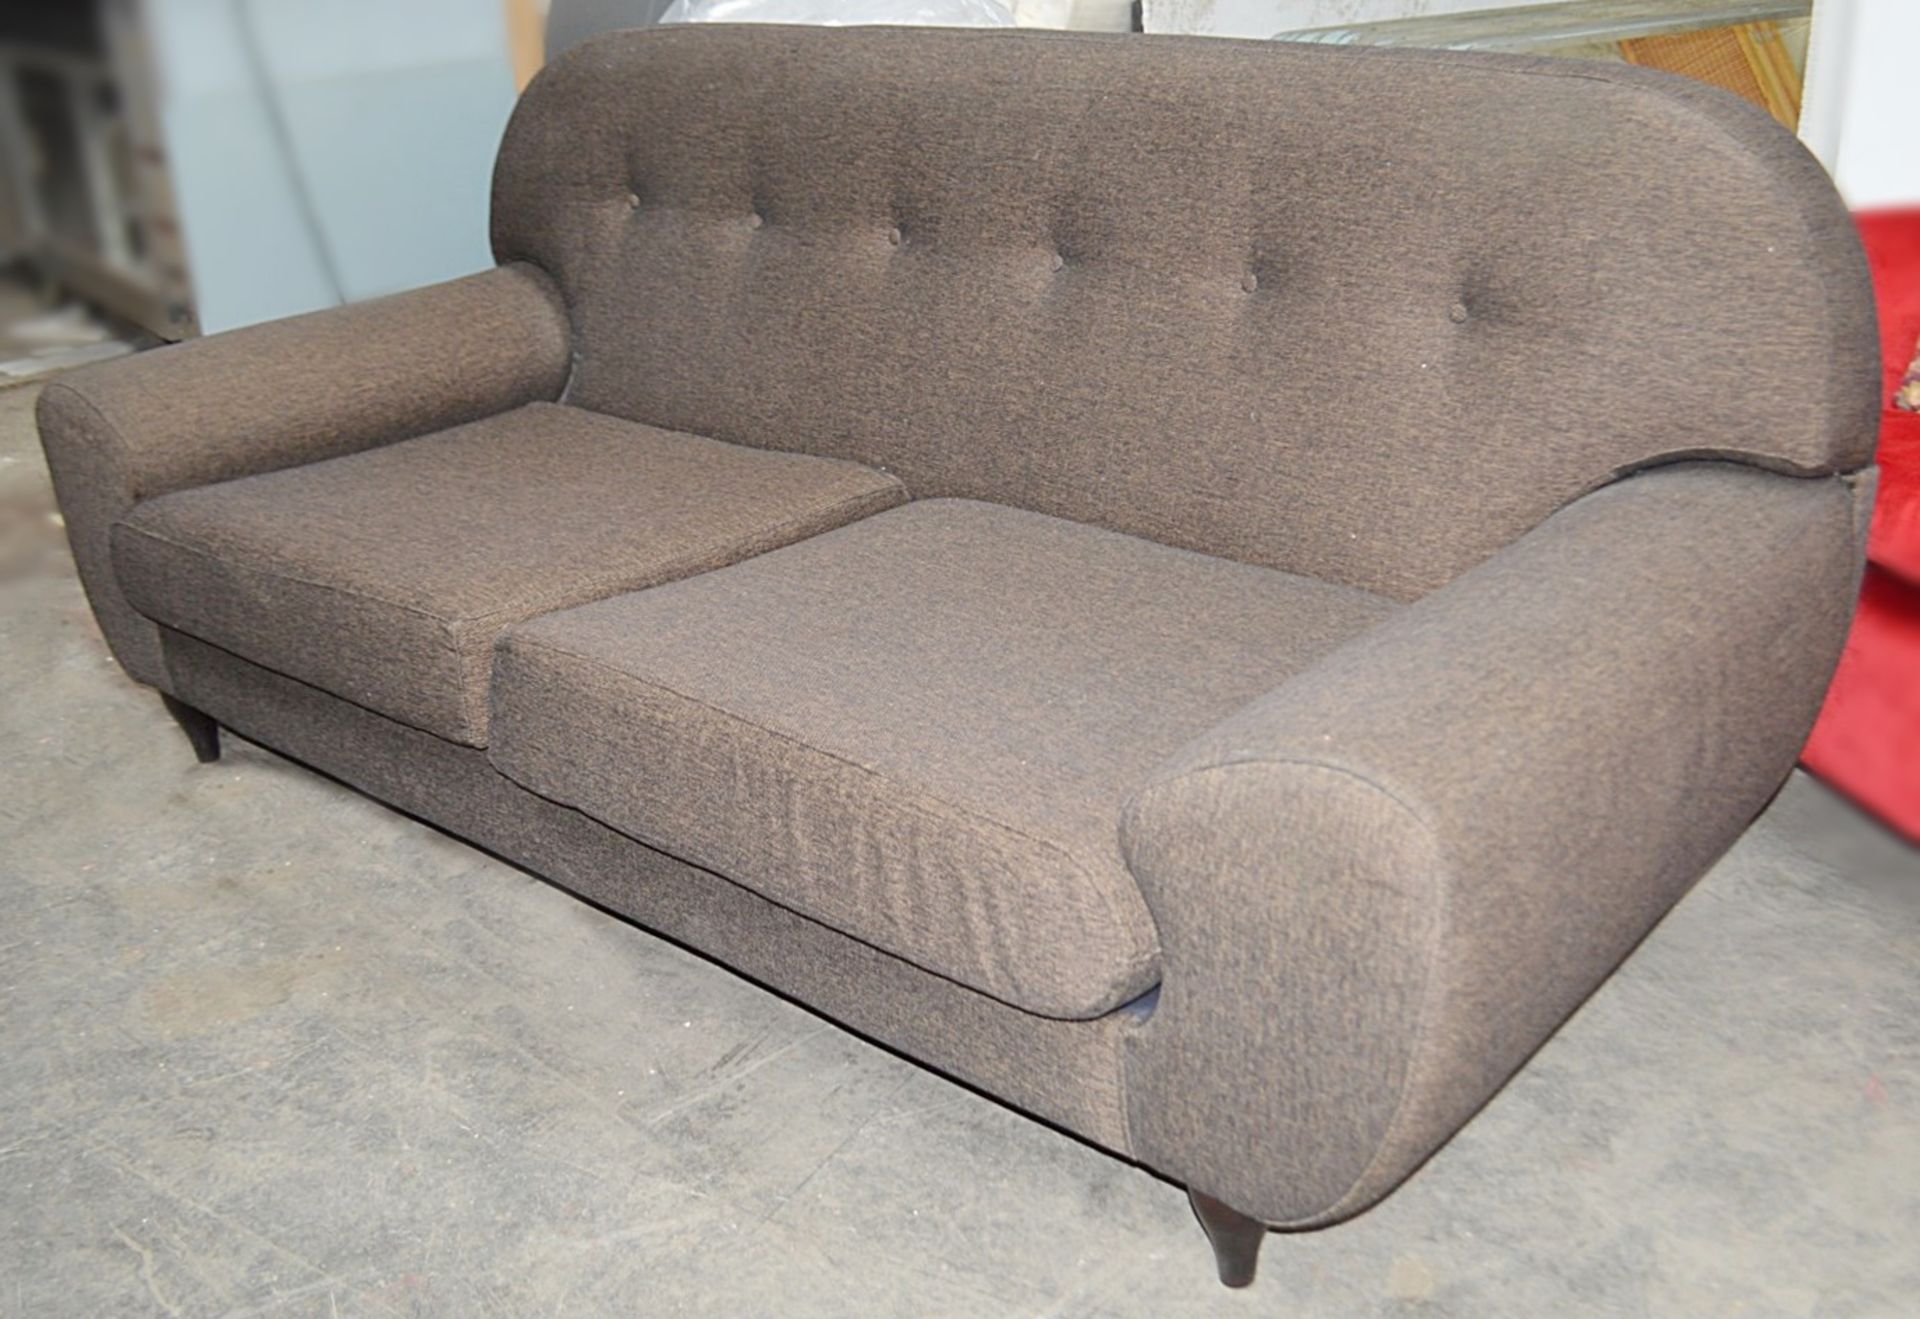 1 x Large Commercial 2-Metre Long Contemporary Sofa In A  Dark Brown/Bronze Woven Fabric - - Image 3 of 6